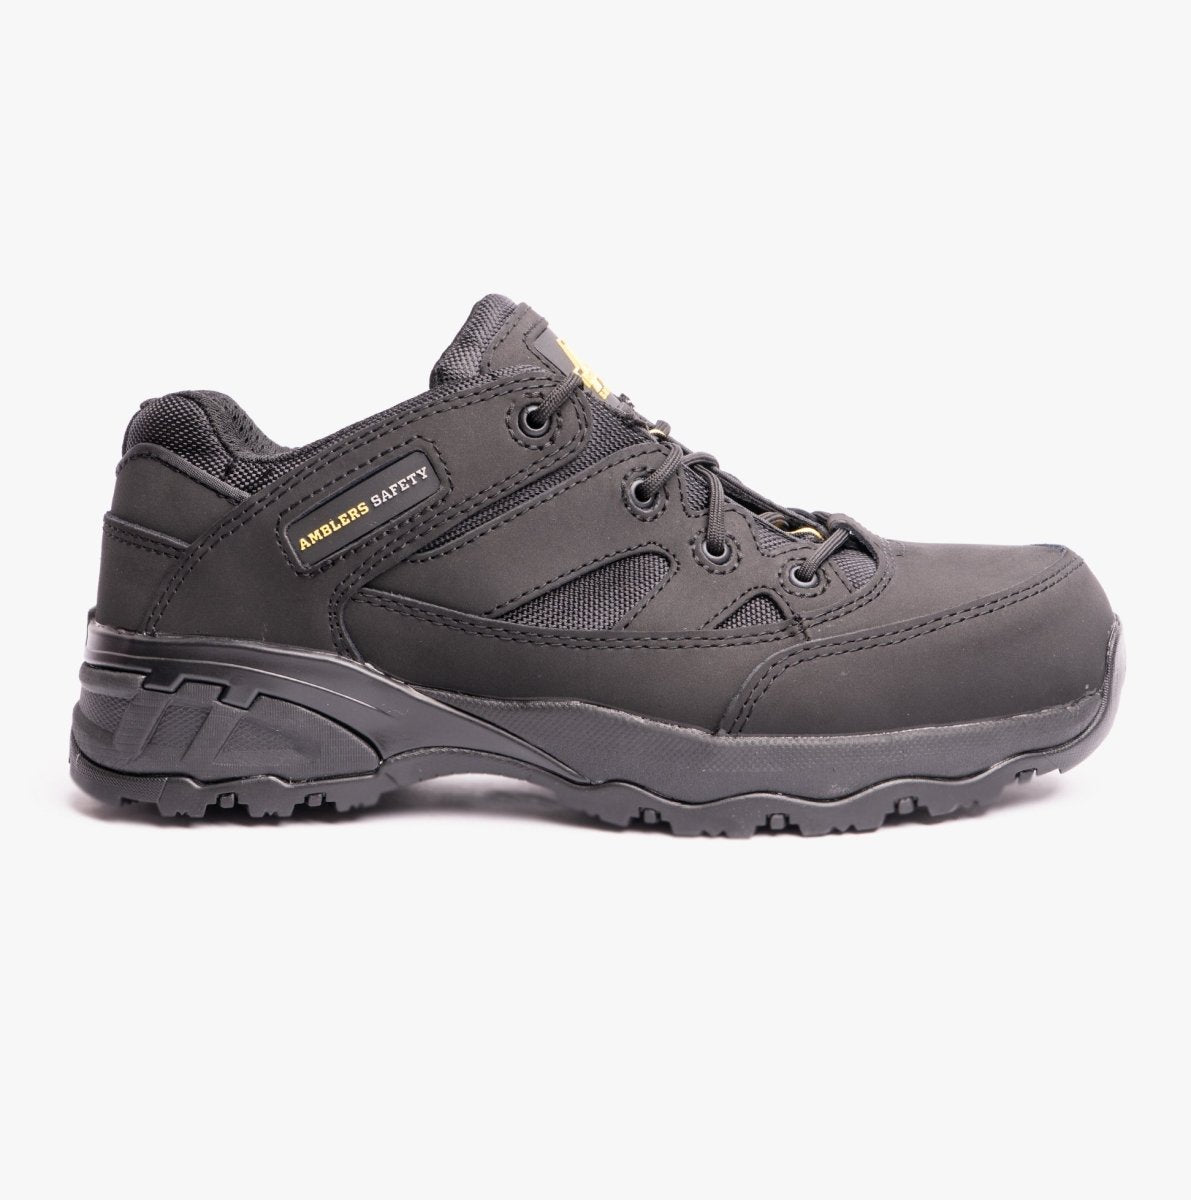 Amblers Safety FS68C Unisex Leather Safety Boots Trainers Black 25816 - 43050 - 02 | STB.co.uk